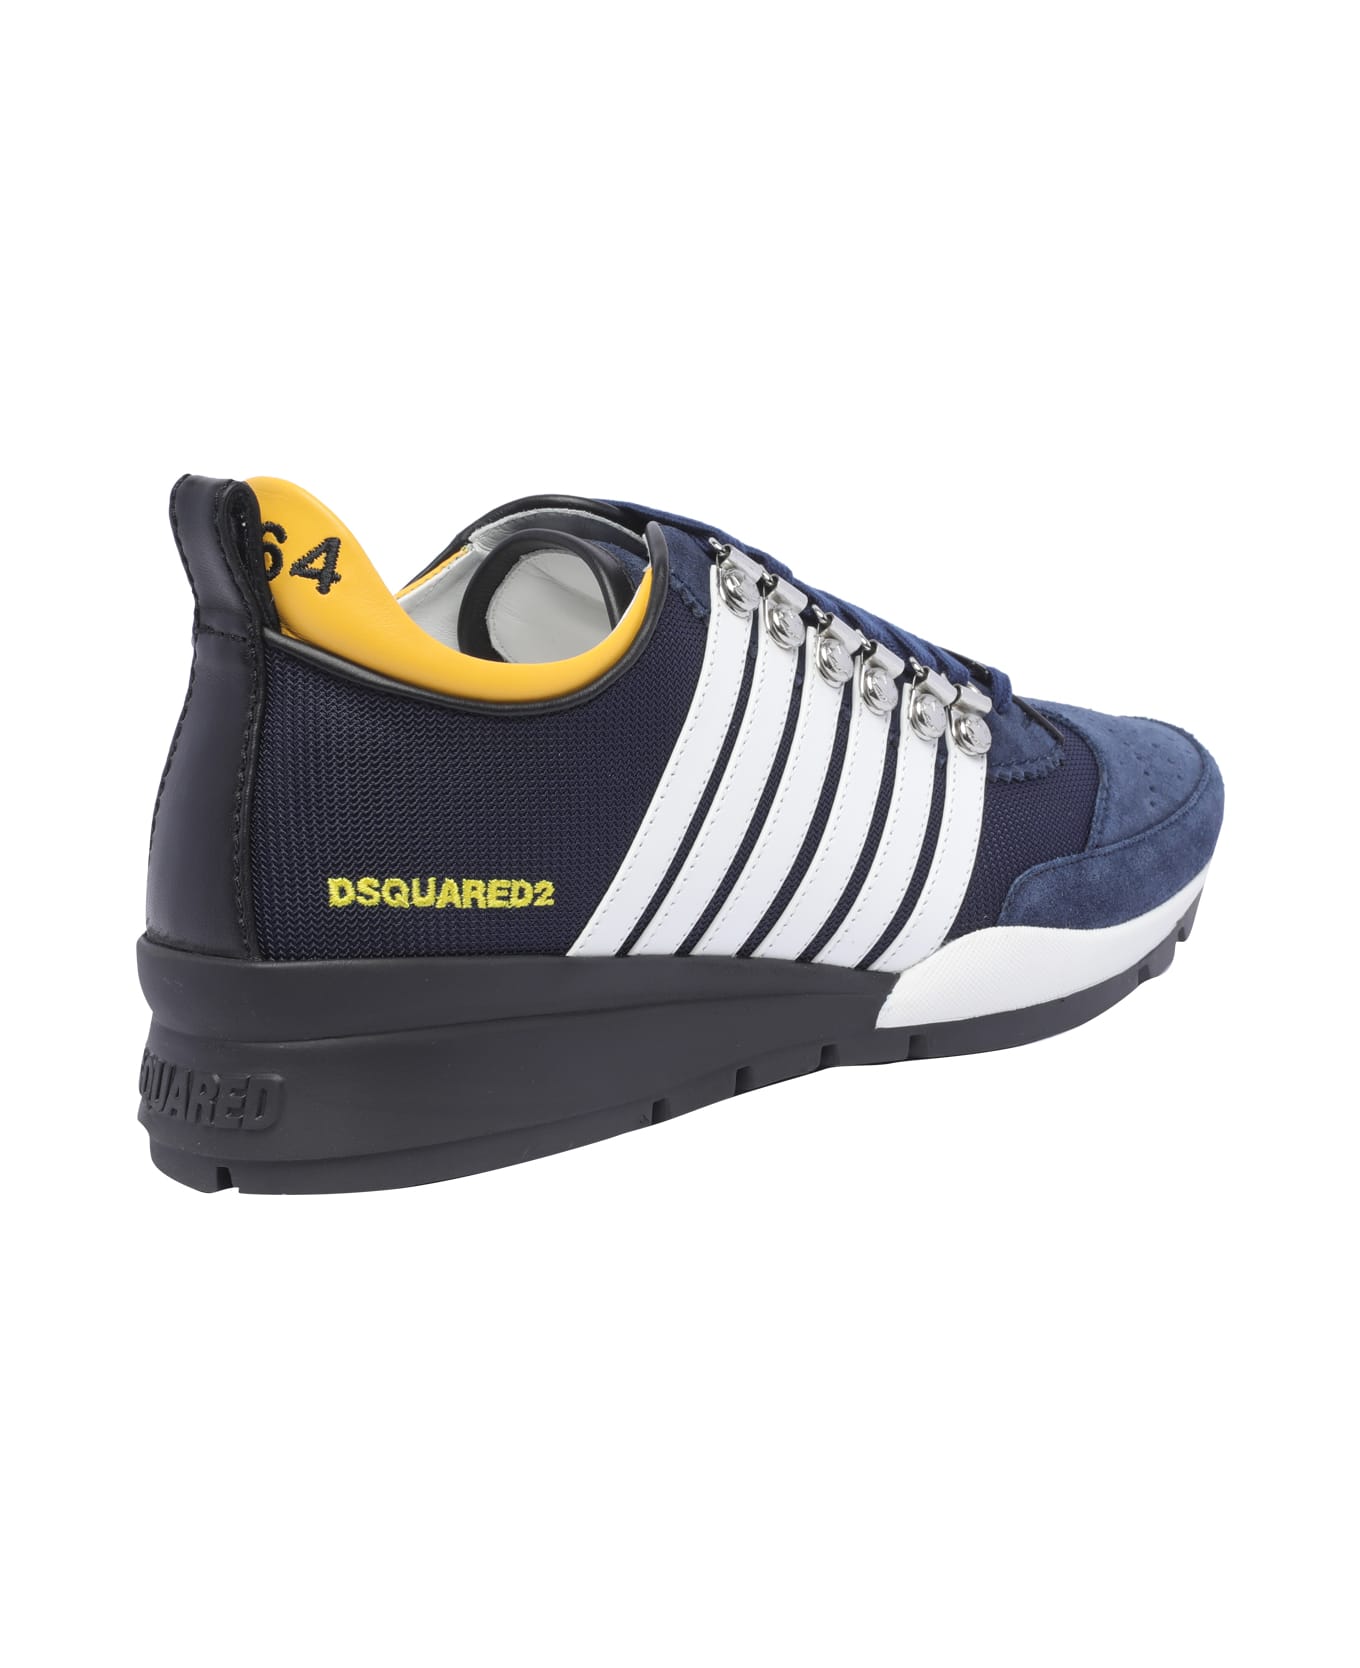 Dsquared2 Legendary Sneakers - Blue